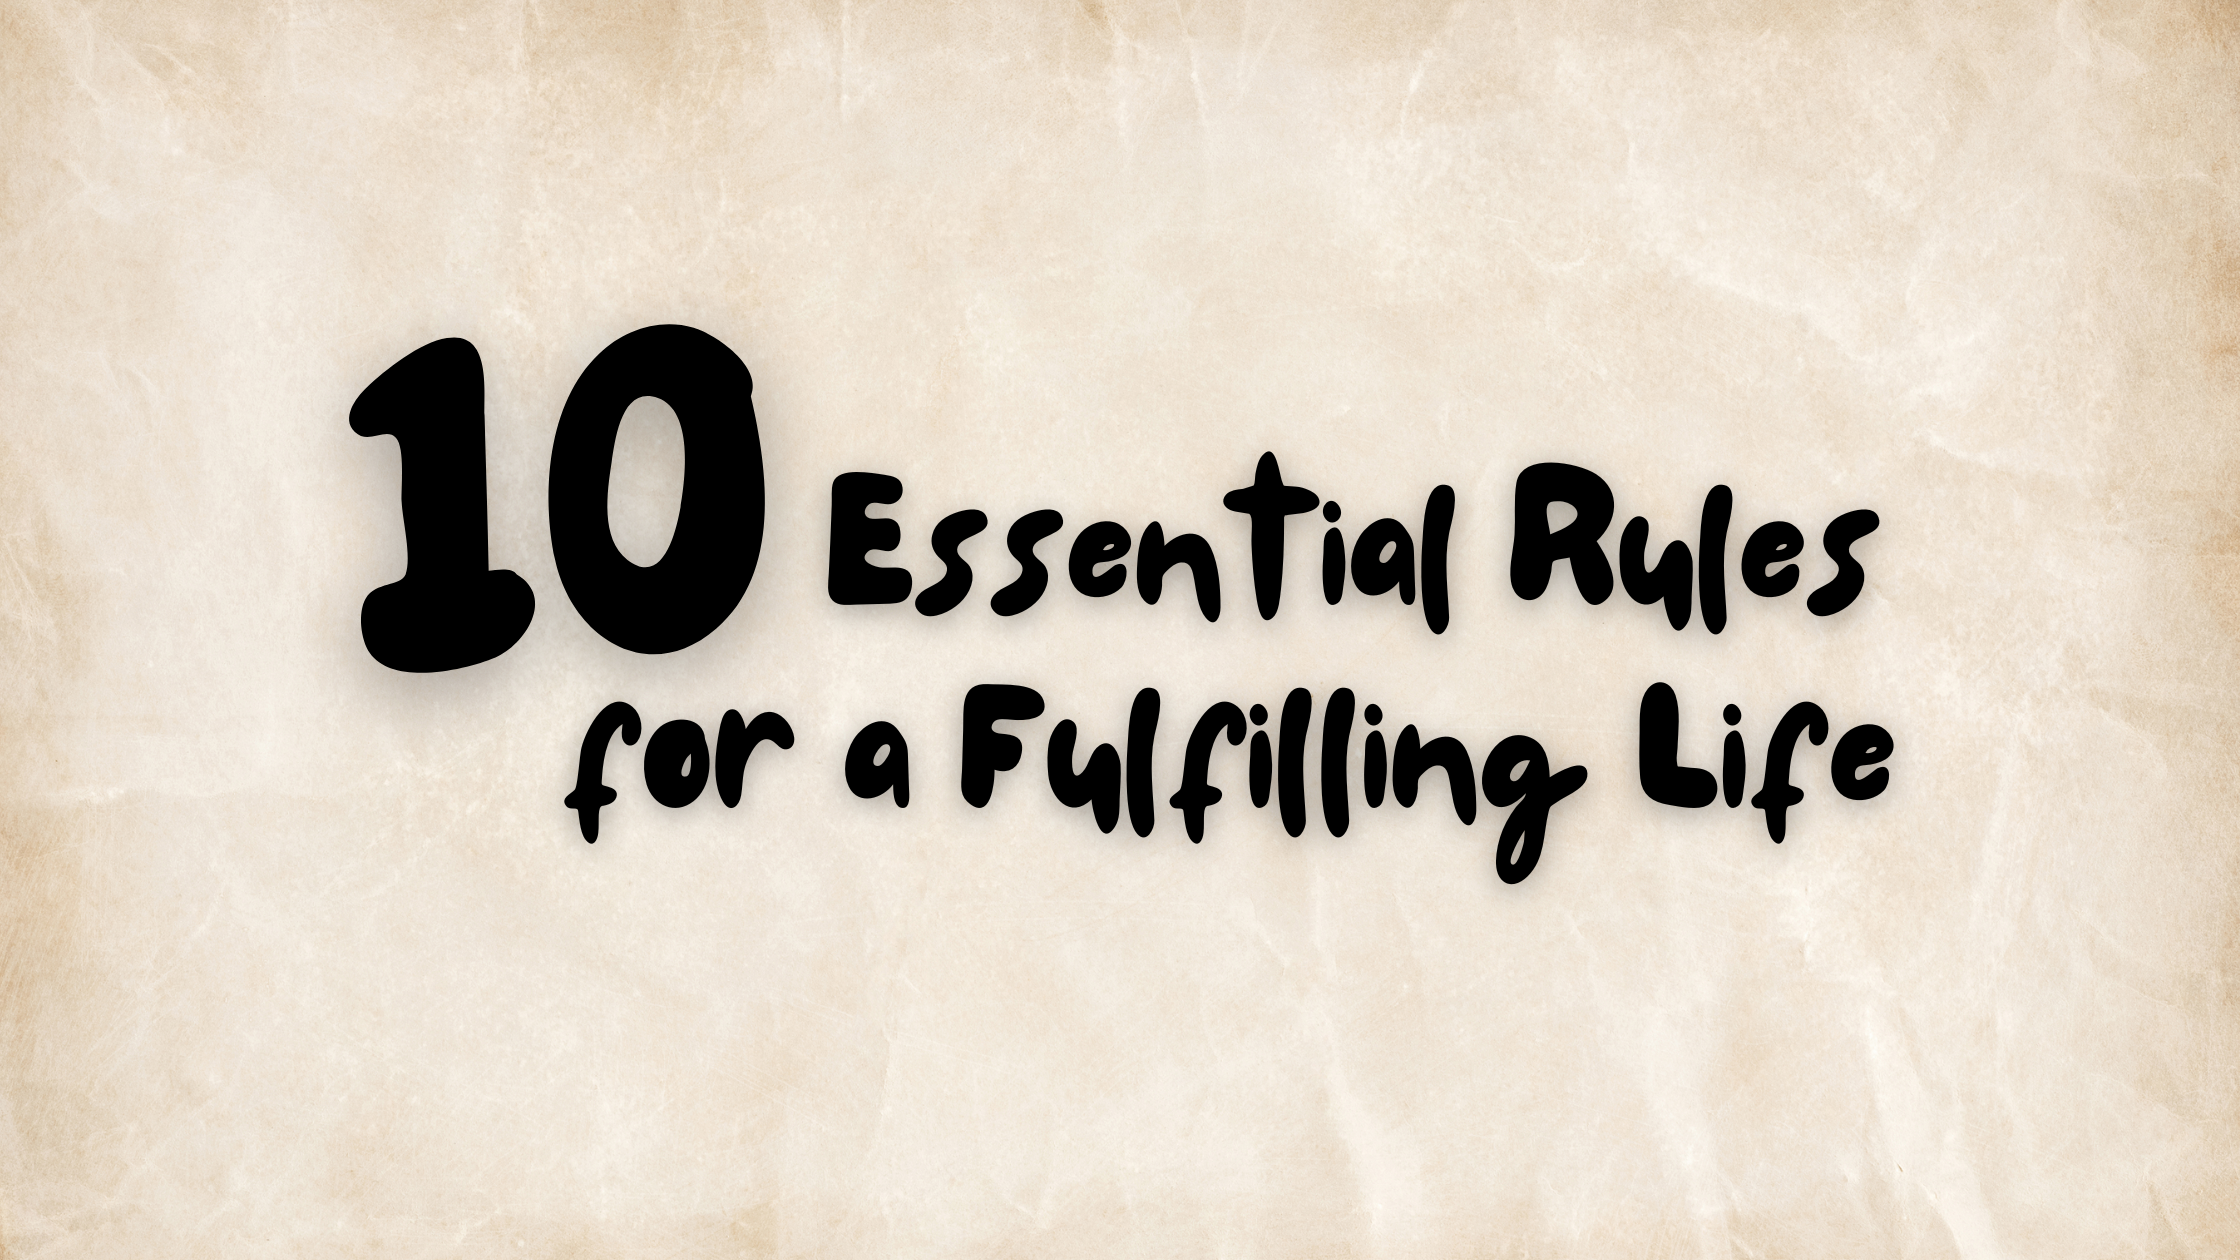 Ten Essential Rules for a Fulfilling Life